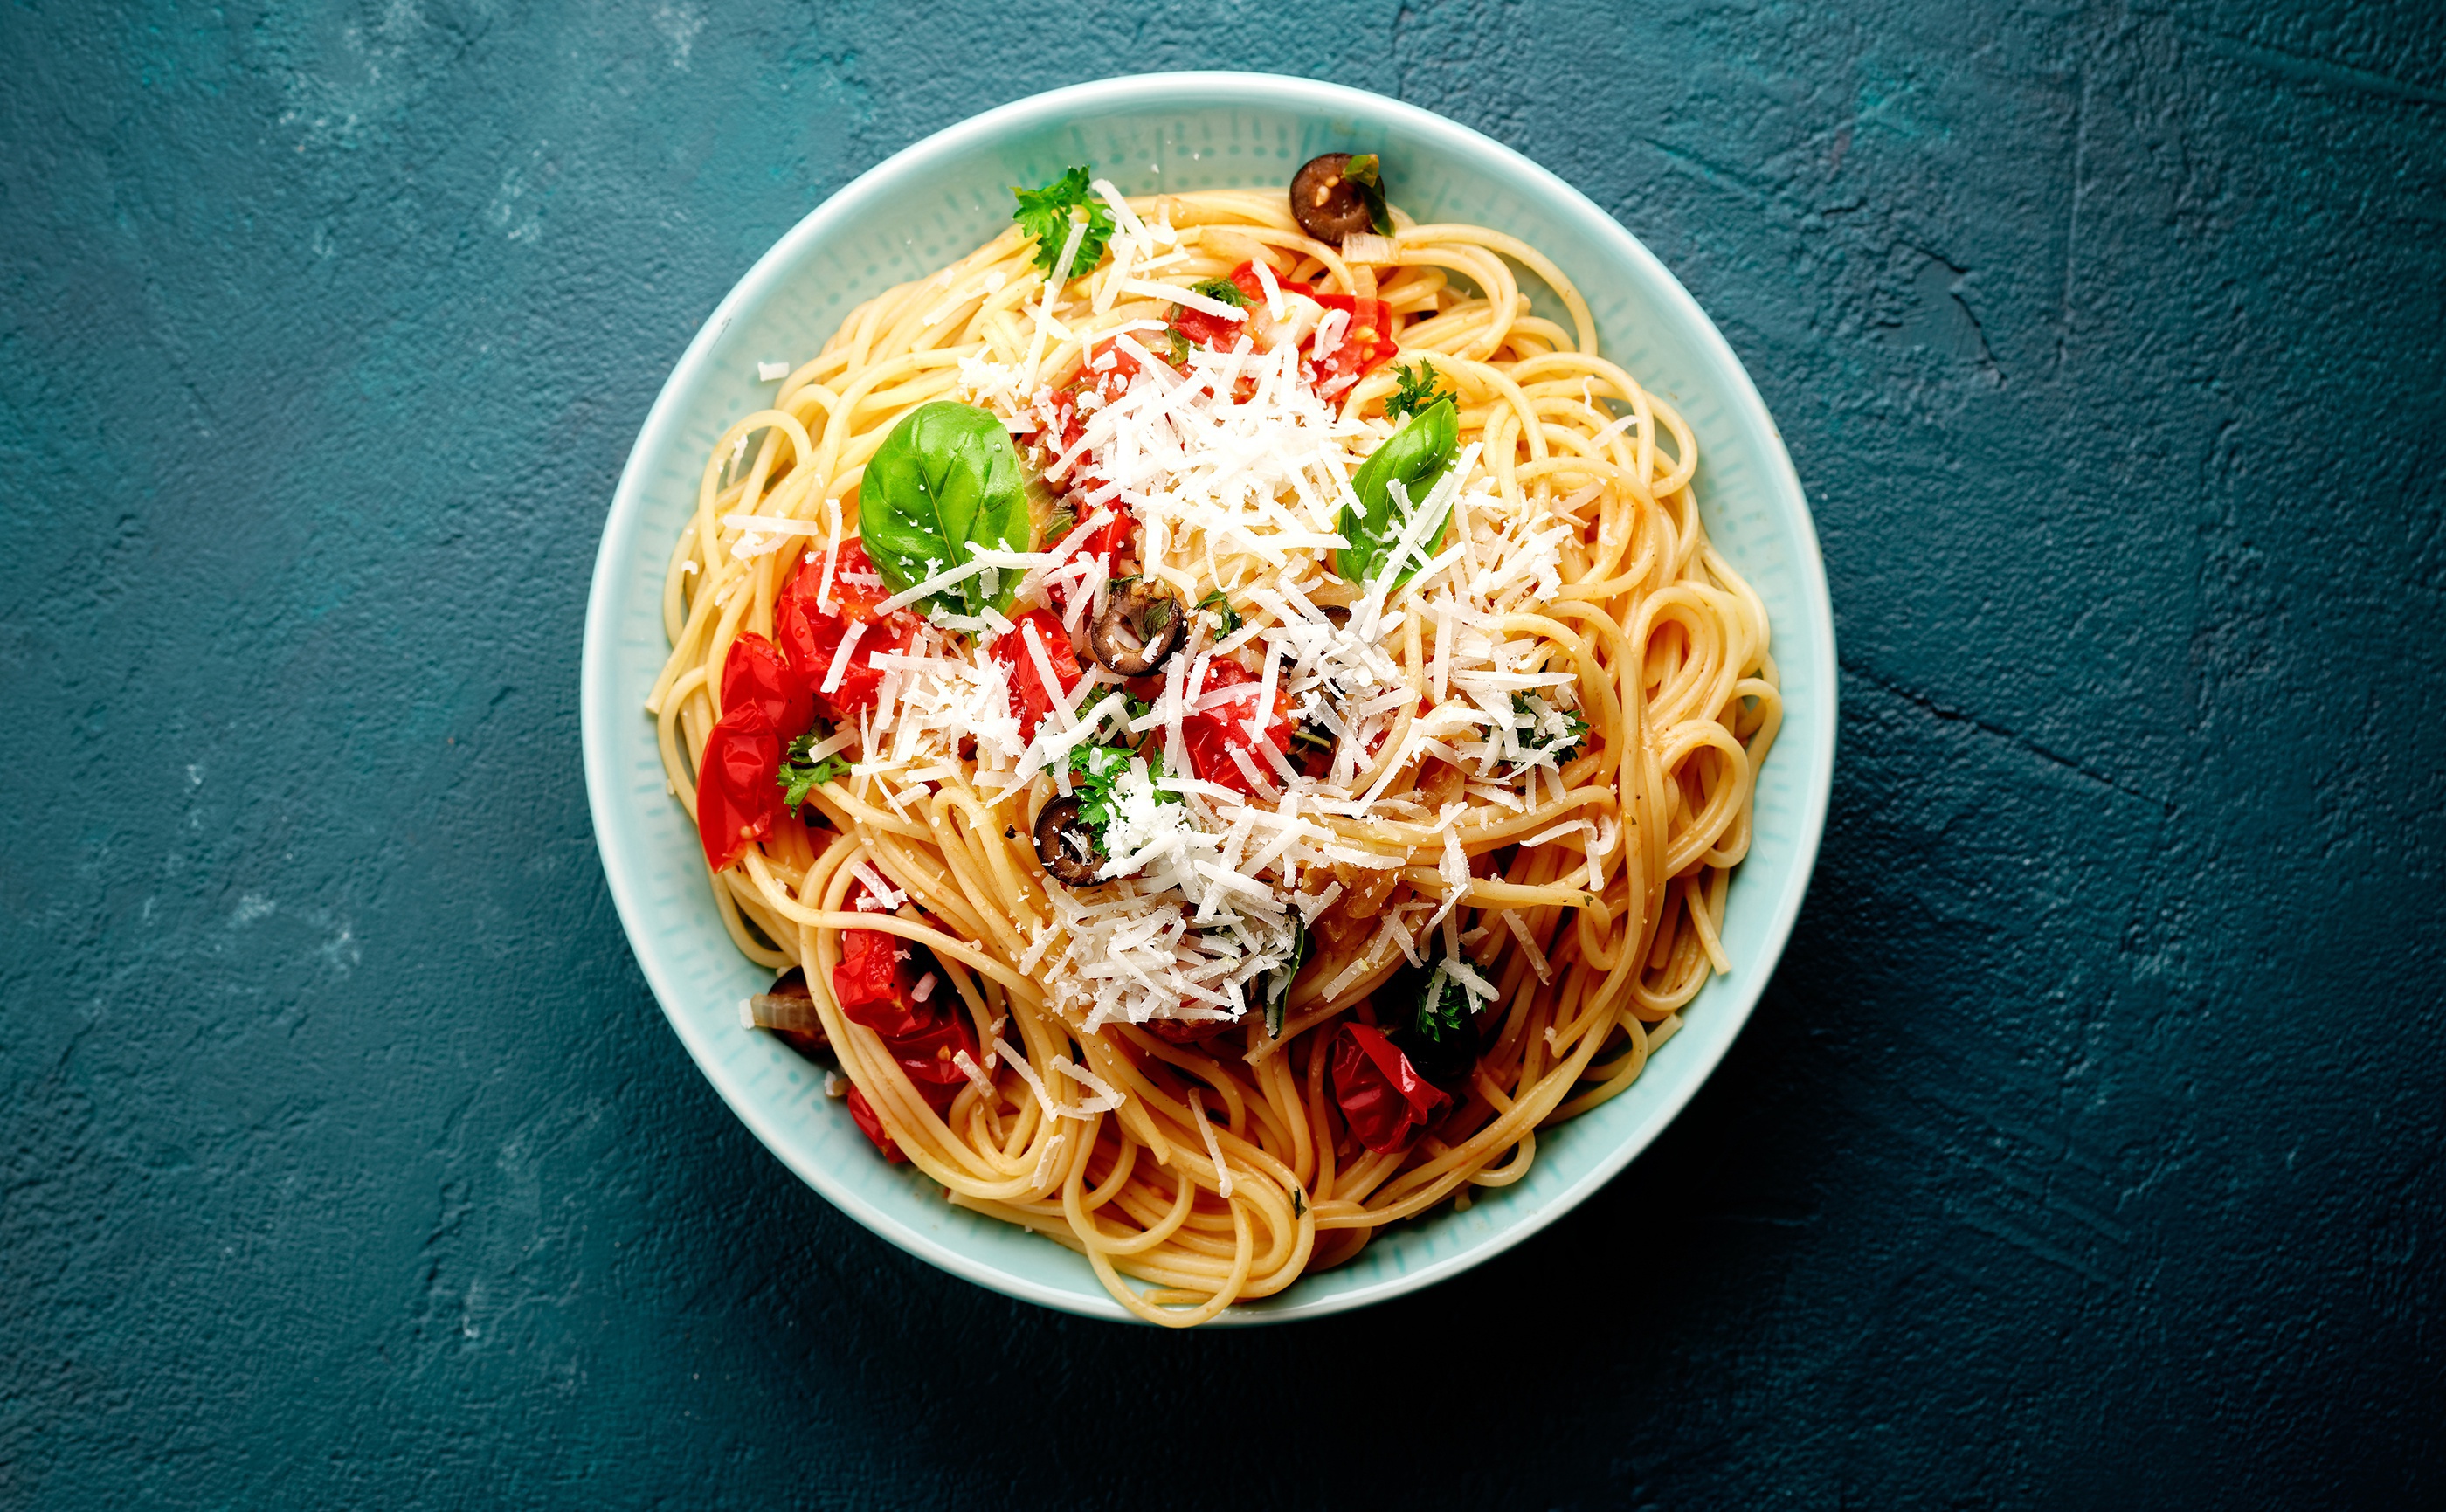 Noodles Food Cheese Pasta Spaghetti Tomatoes Basil Olives Bowls 2800x1731